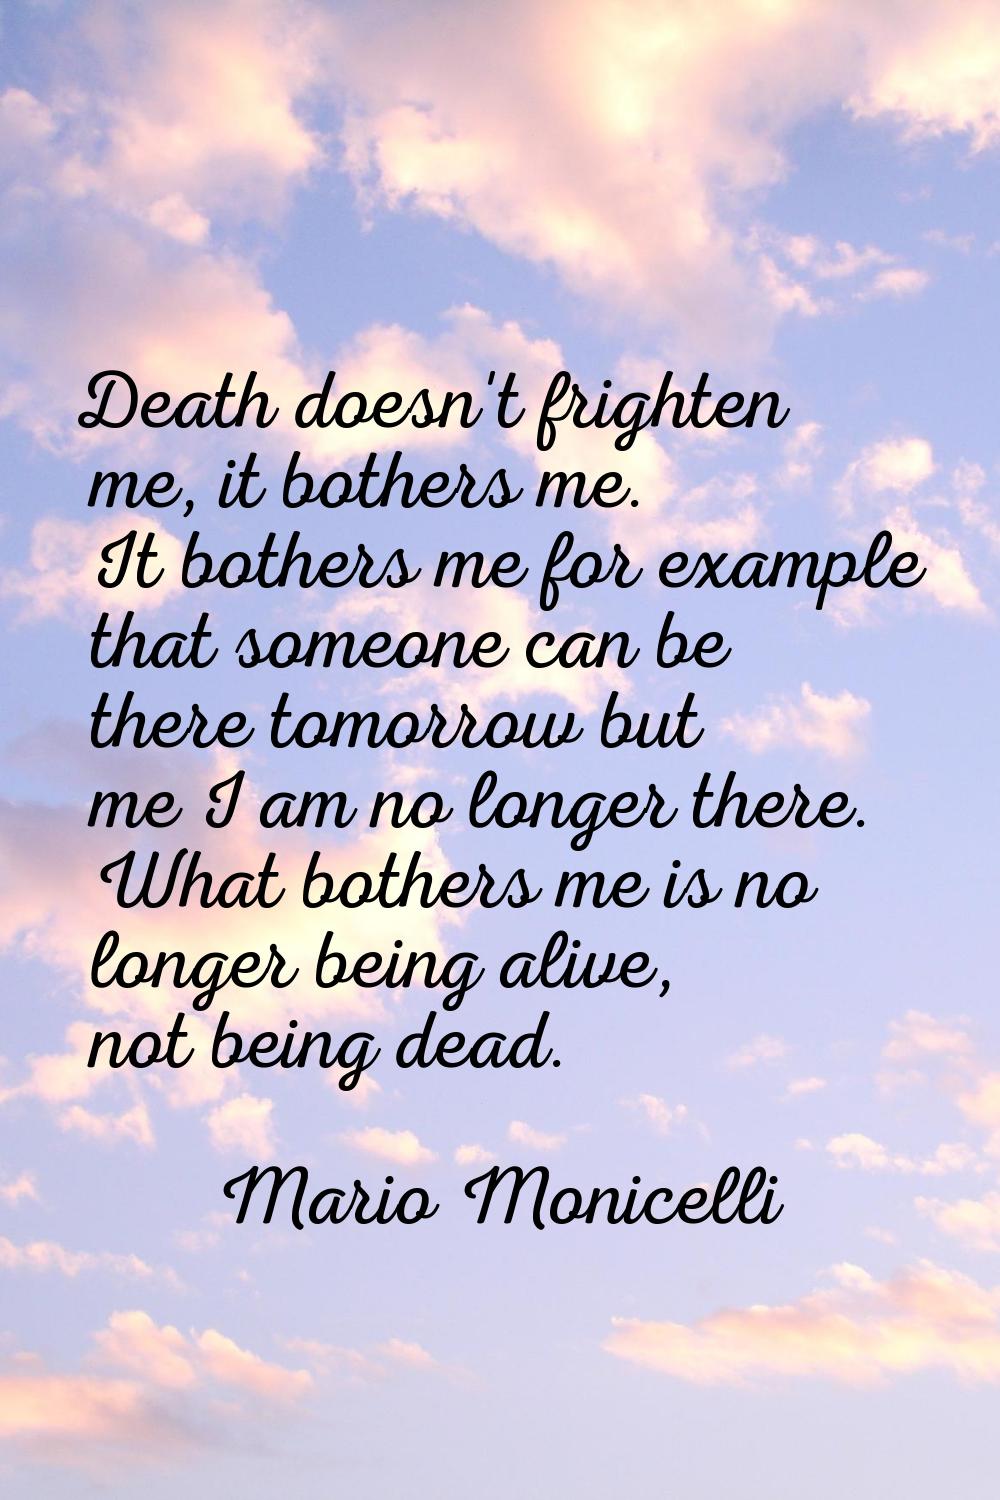 Death doesn't frighten me, it bothers me. It bothers me for example that someone can be there tomor